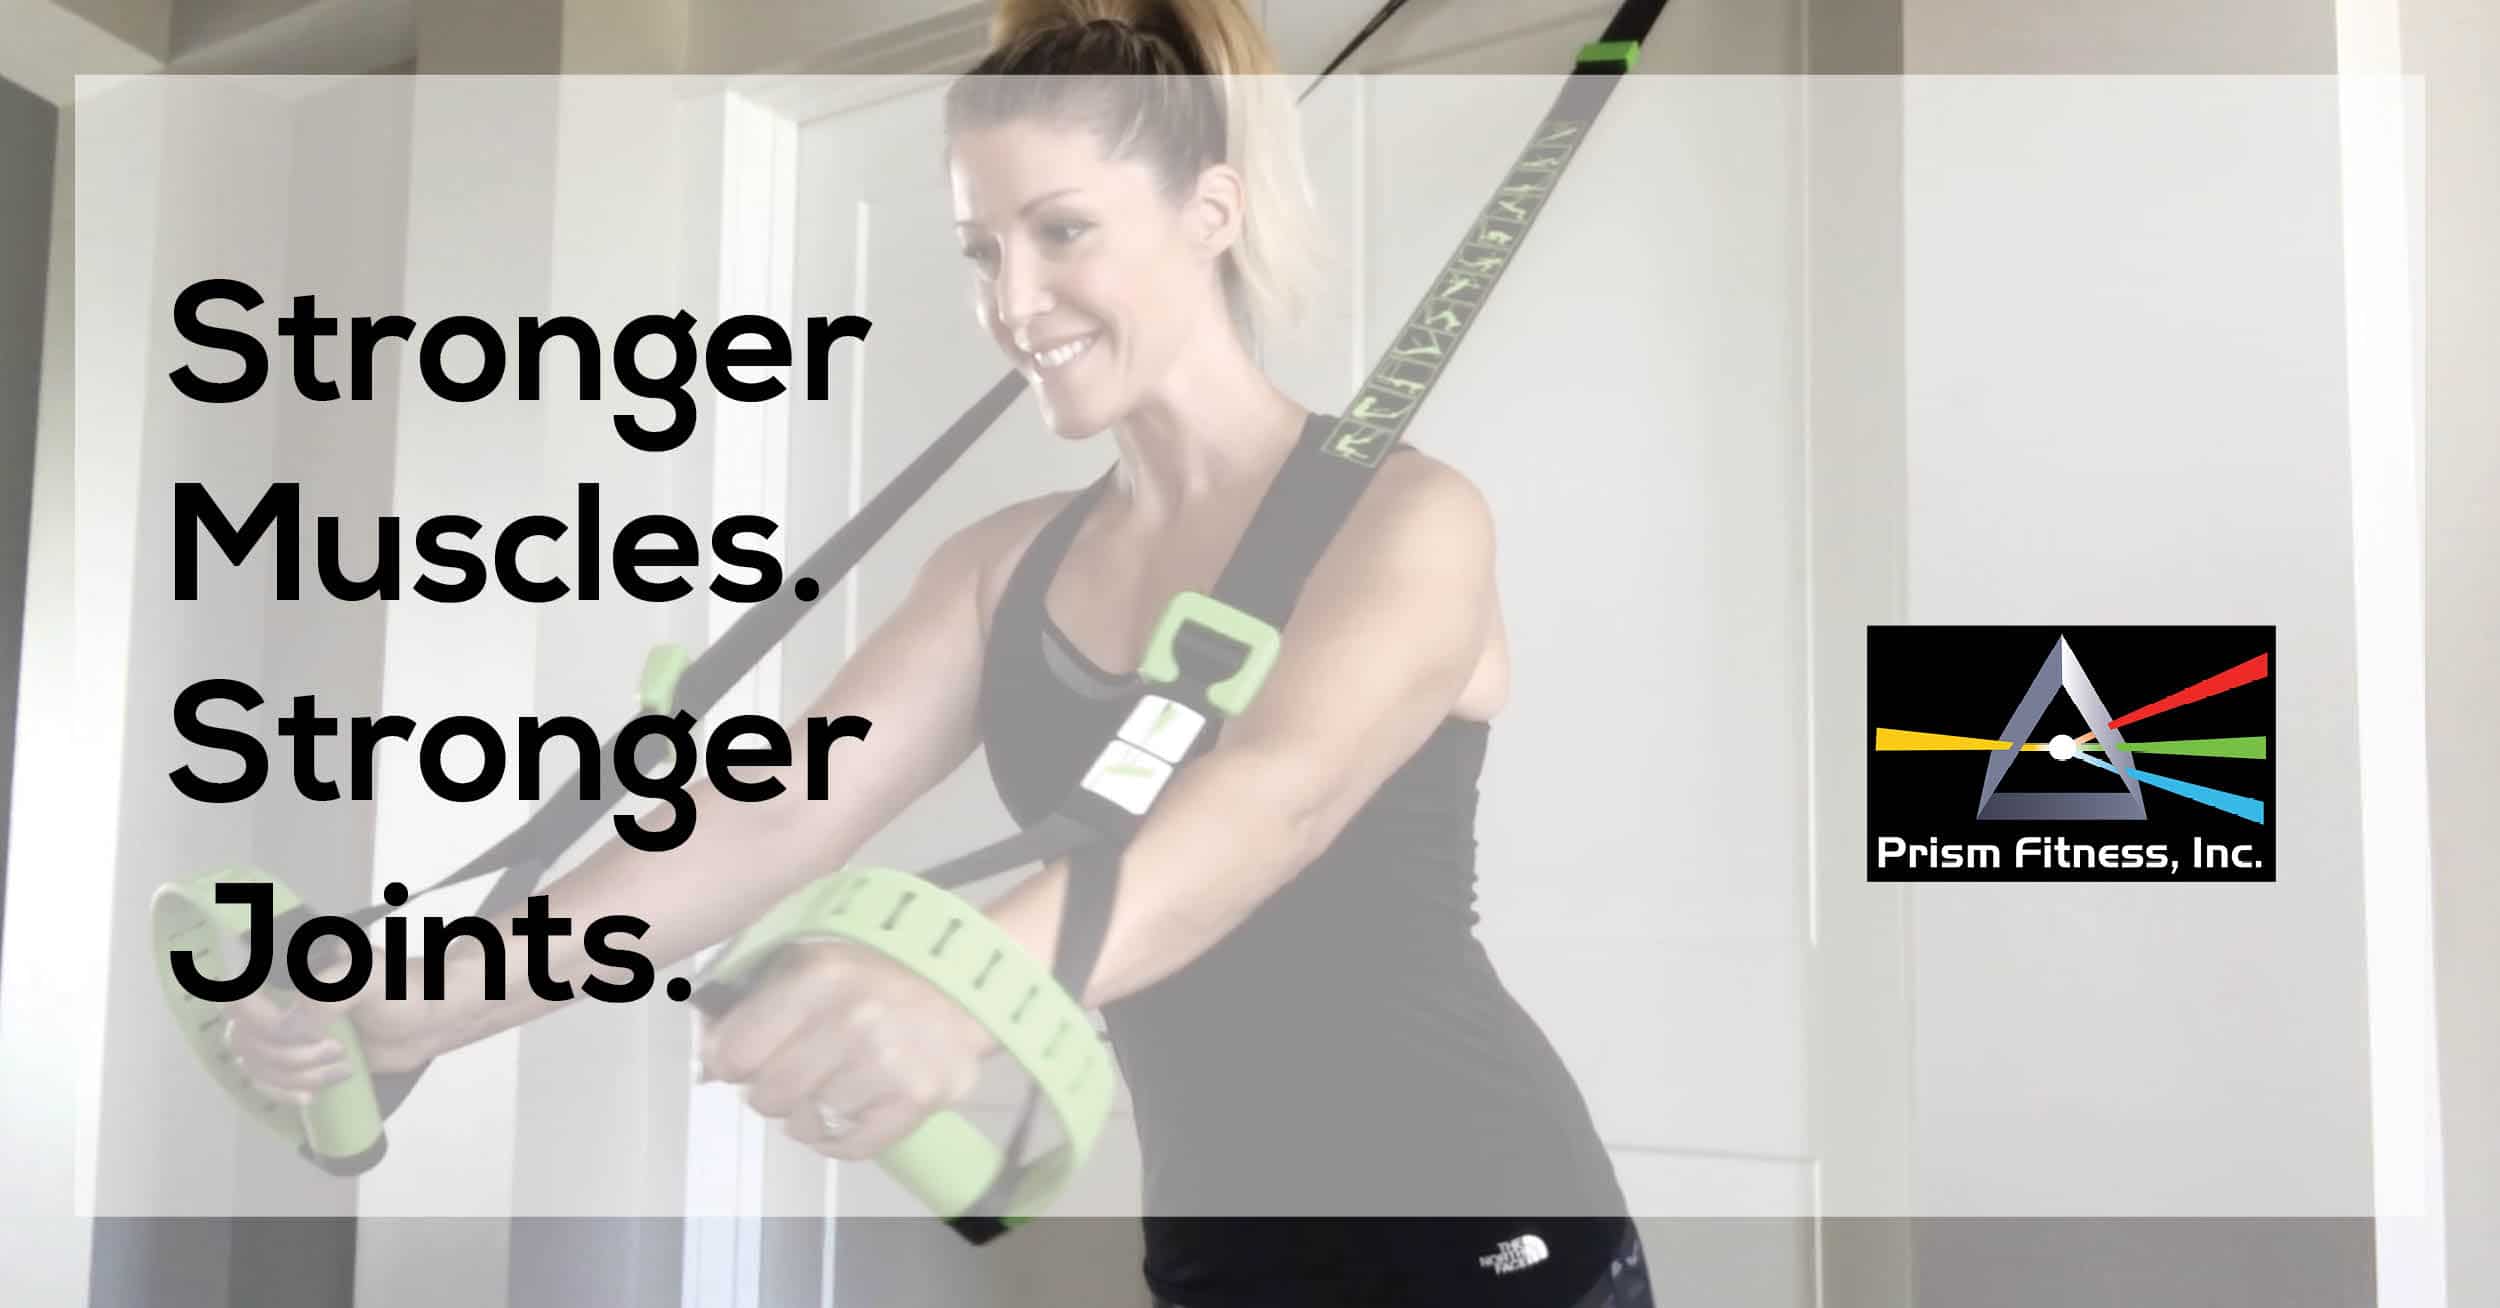 Build stronger joints with the Smart Straps Body Weight Training System